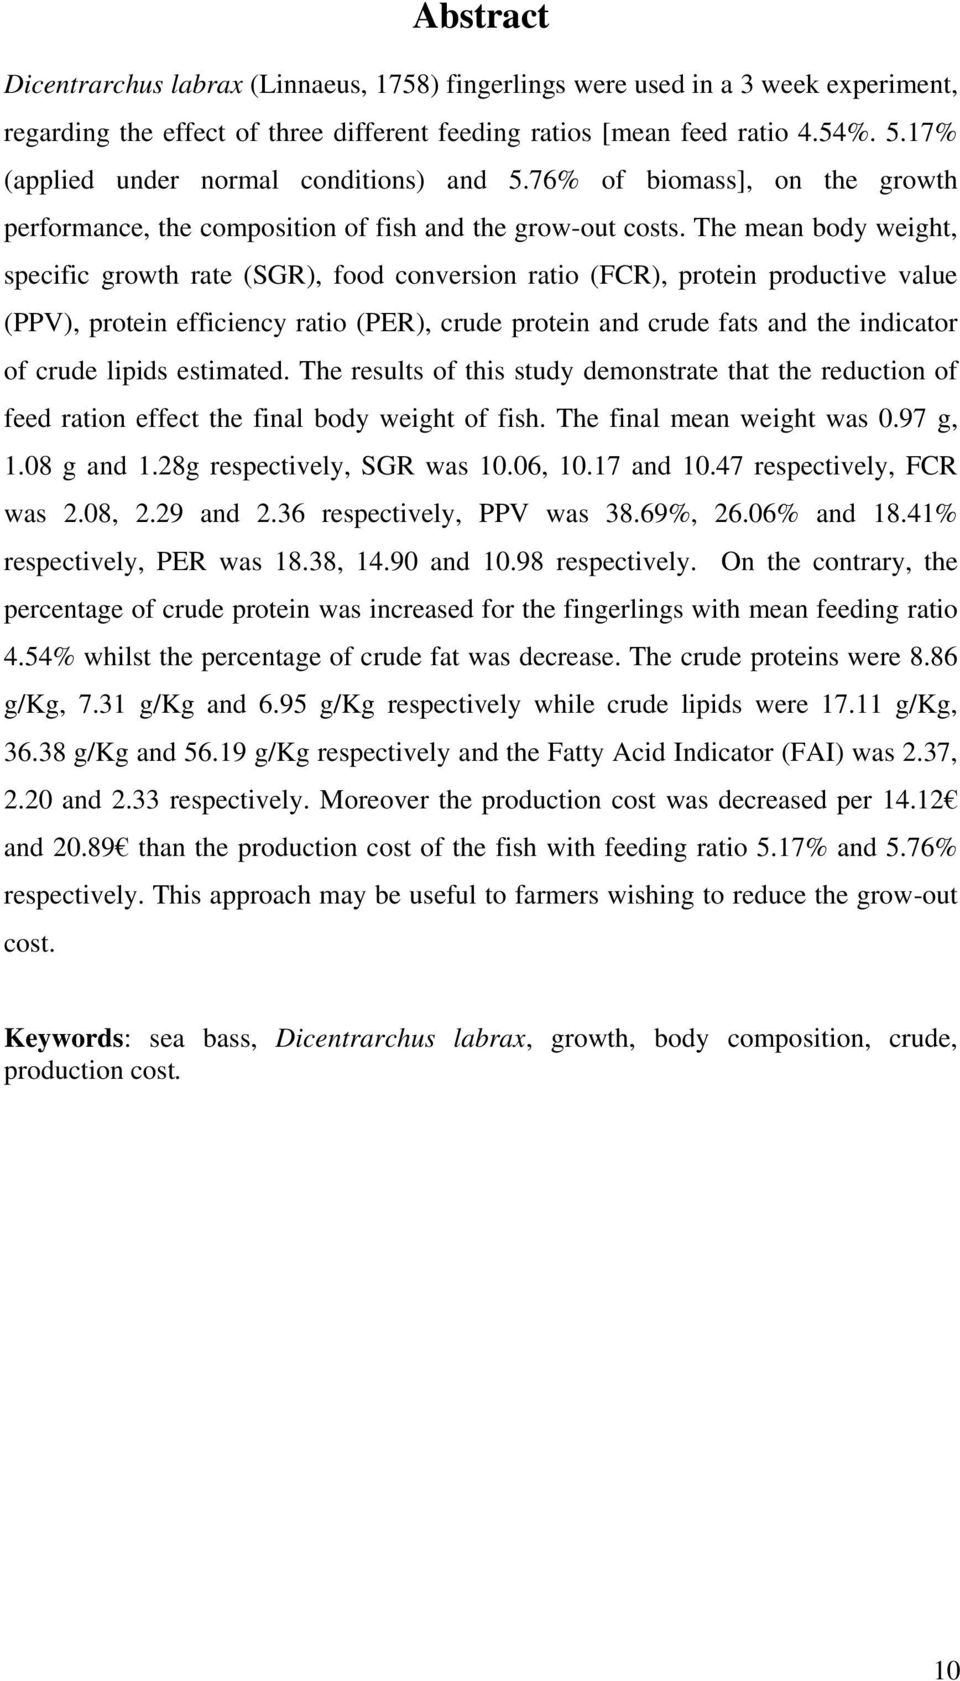 The mean body weight, specific growth rate (SGR), food conversion ratio (FCR), protein productive value (PPV), protein efficiency ratio (PER), crude protein and crude fats and the indicator of crude